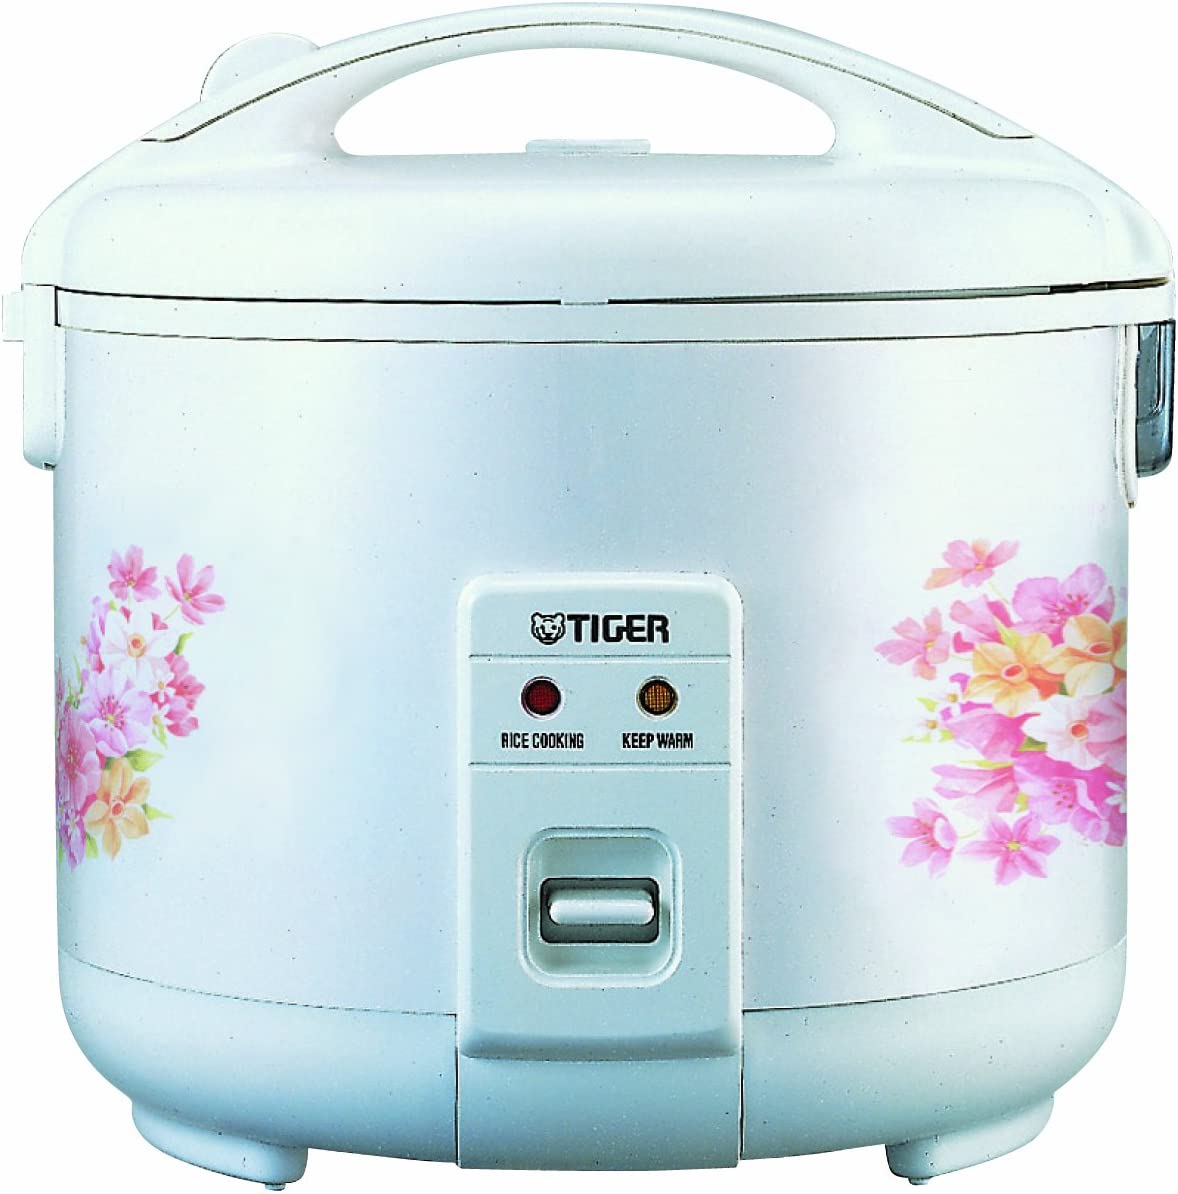 Tiger Rice Cooker and Warmer, 8-Cup (Uncooked)